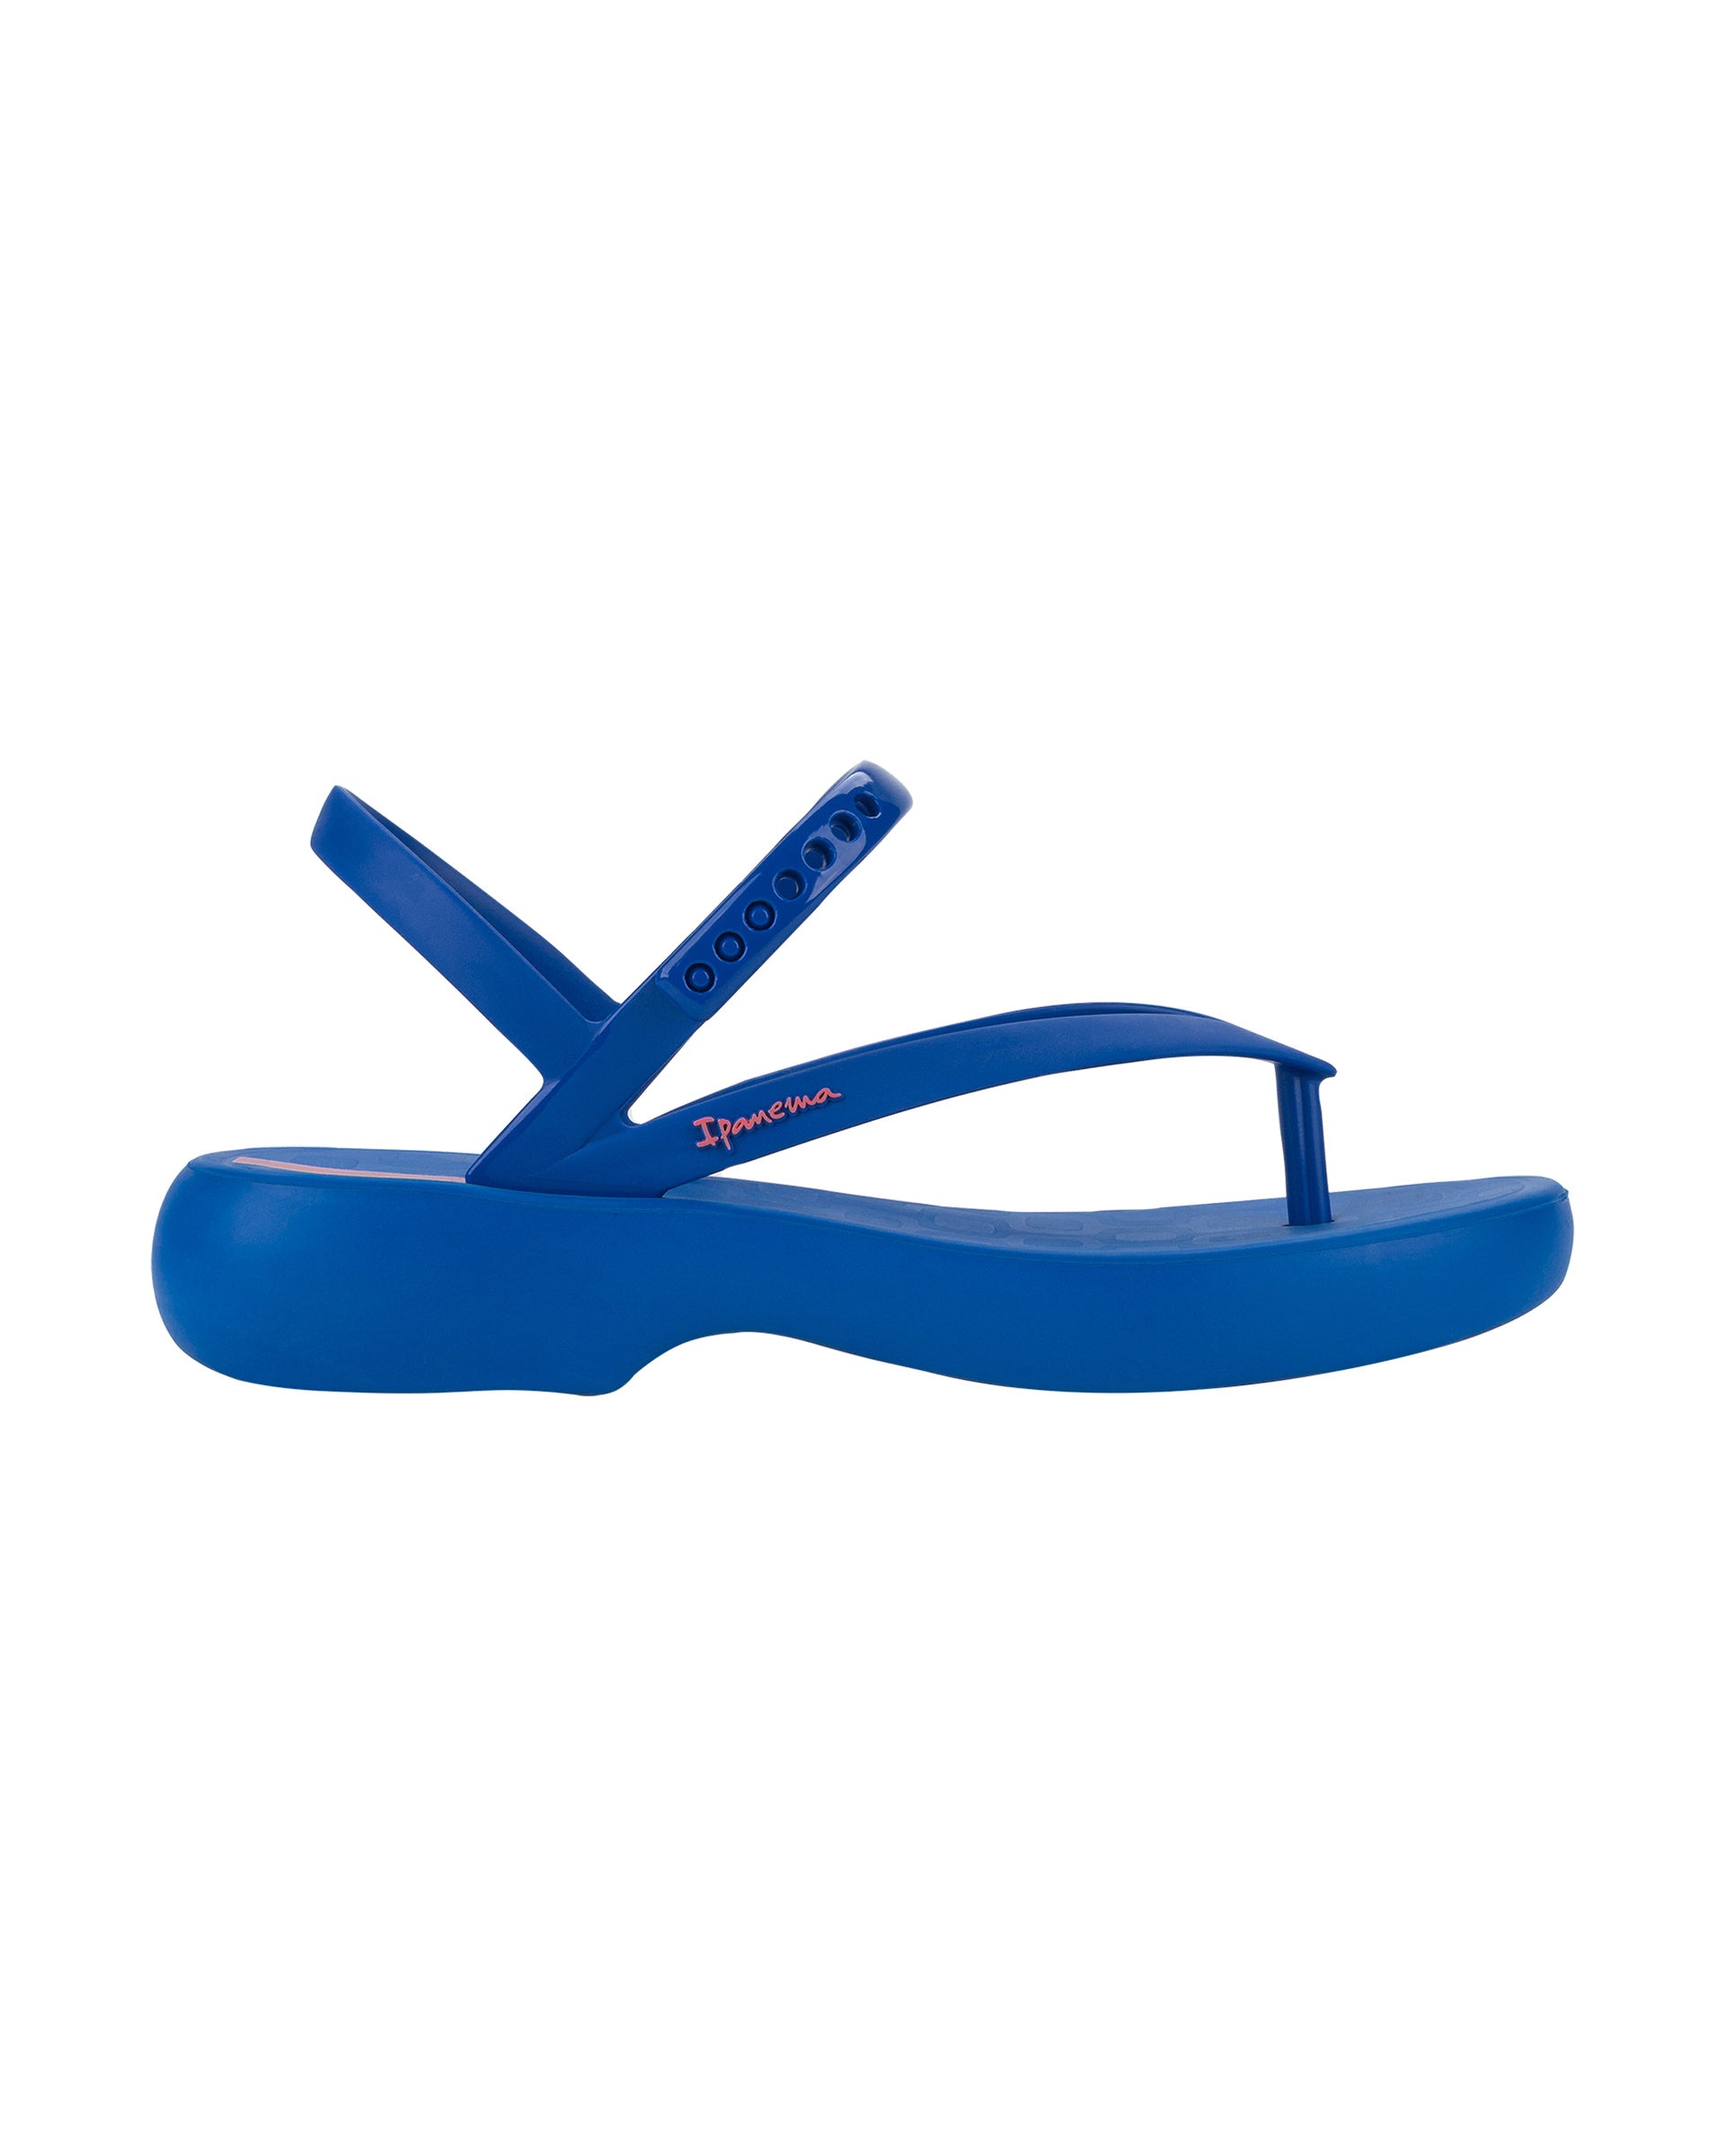 Outer side view of a blue Ipanema Verano women's sandal.